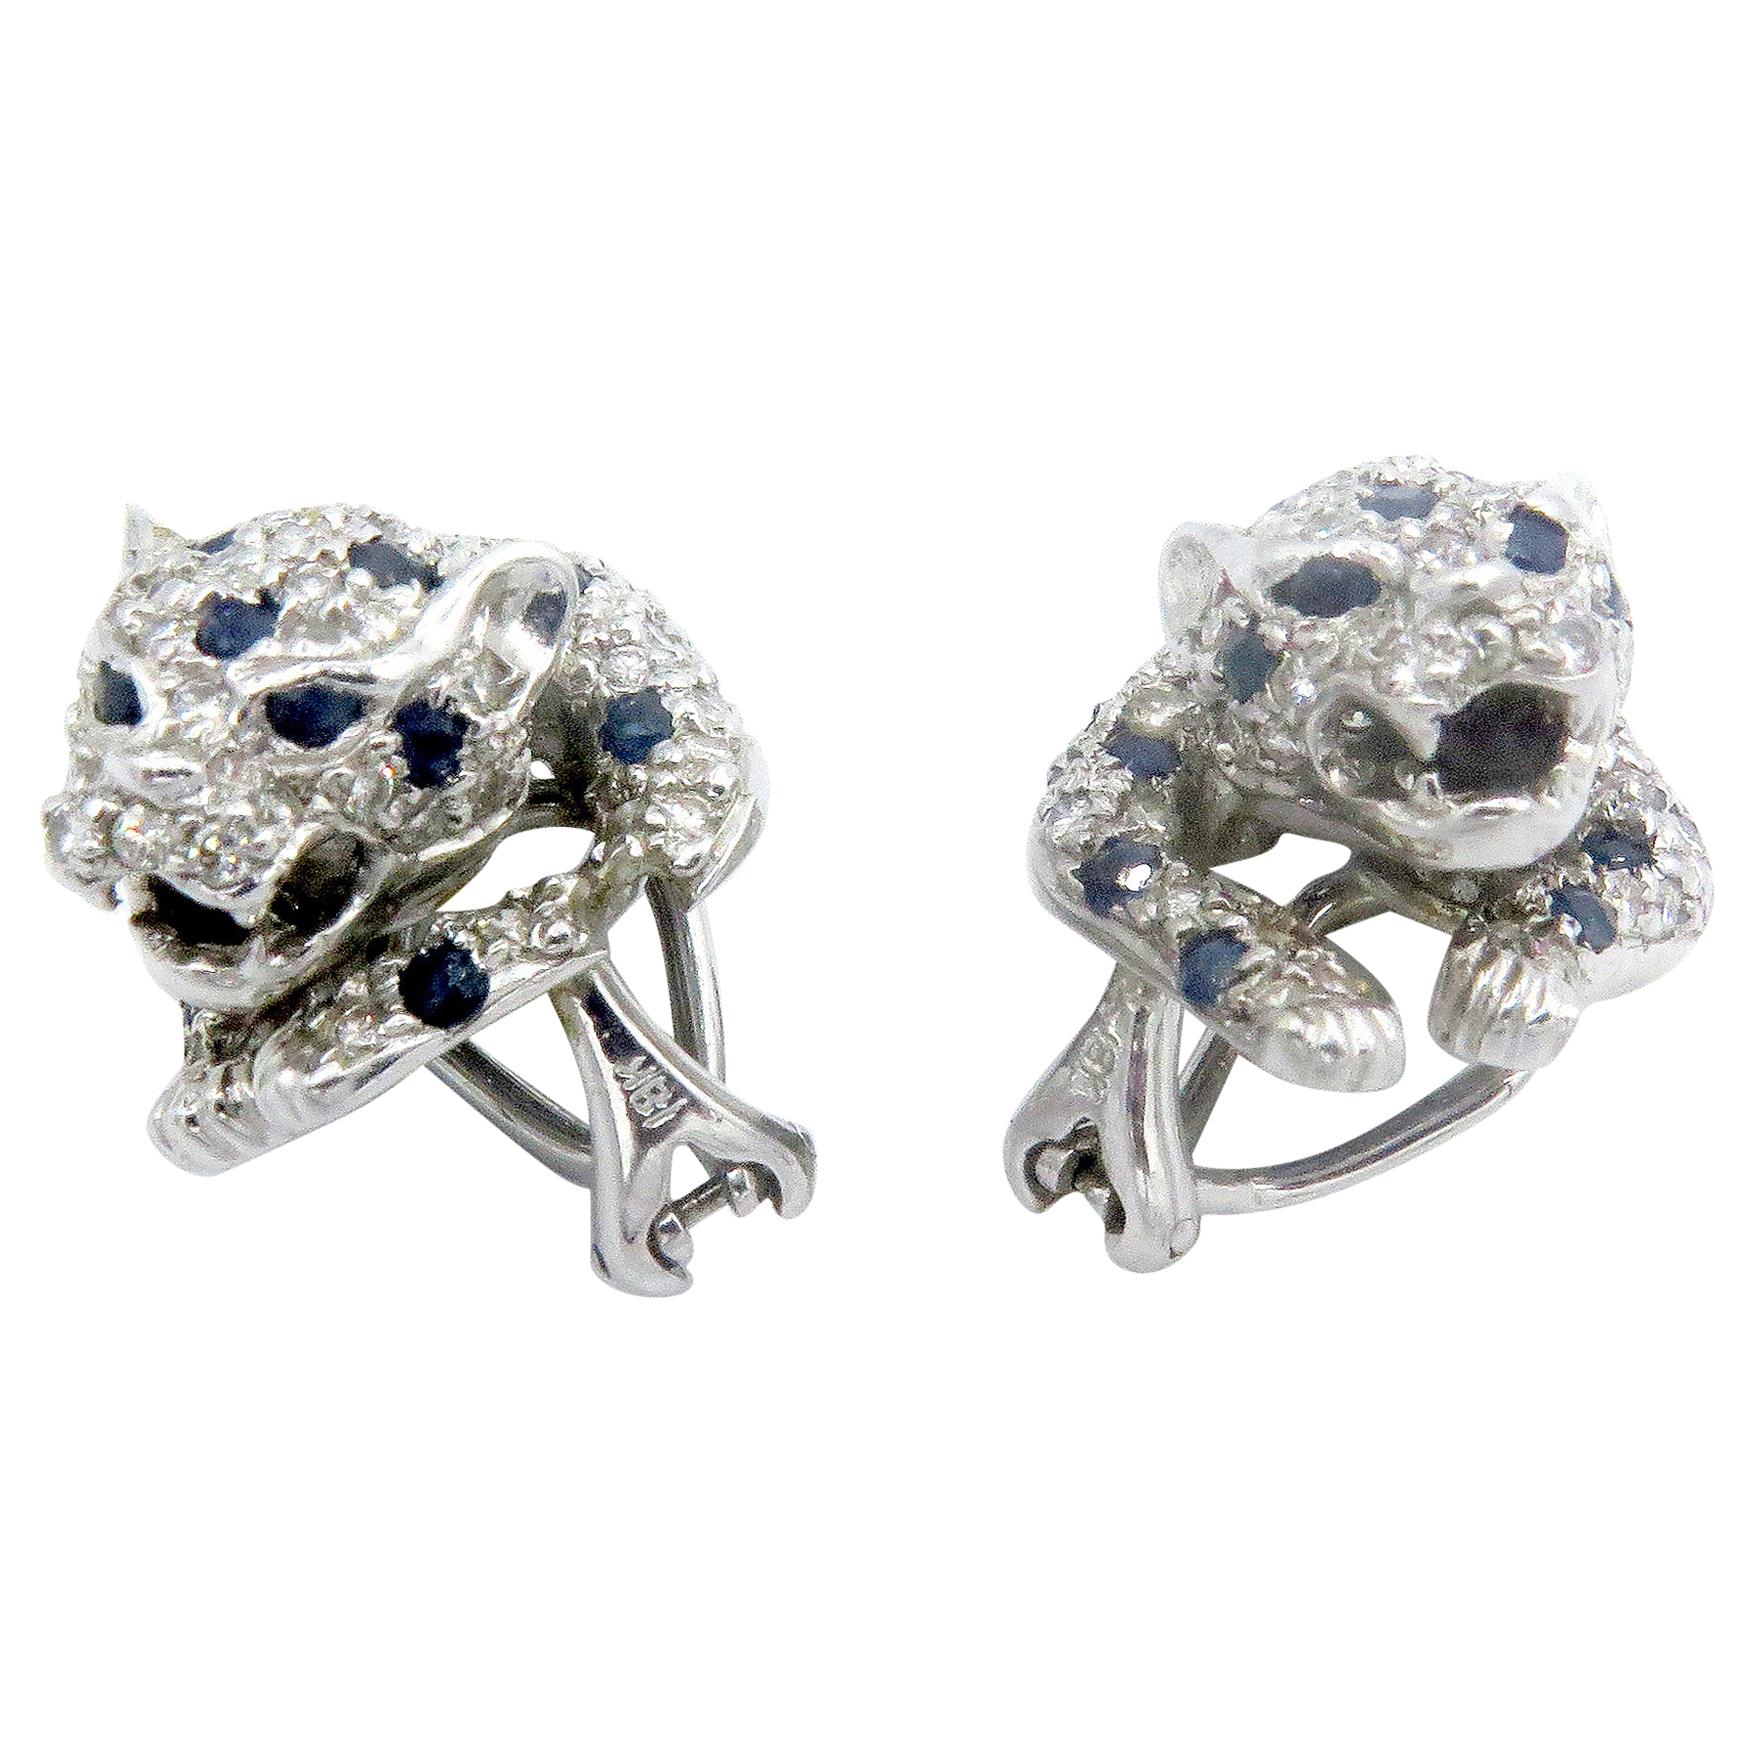 18 Karat White Gold Diamond and Sapphire Panther Stud Earrings